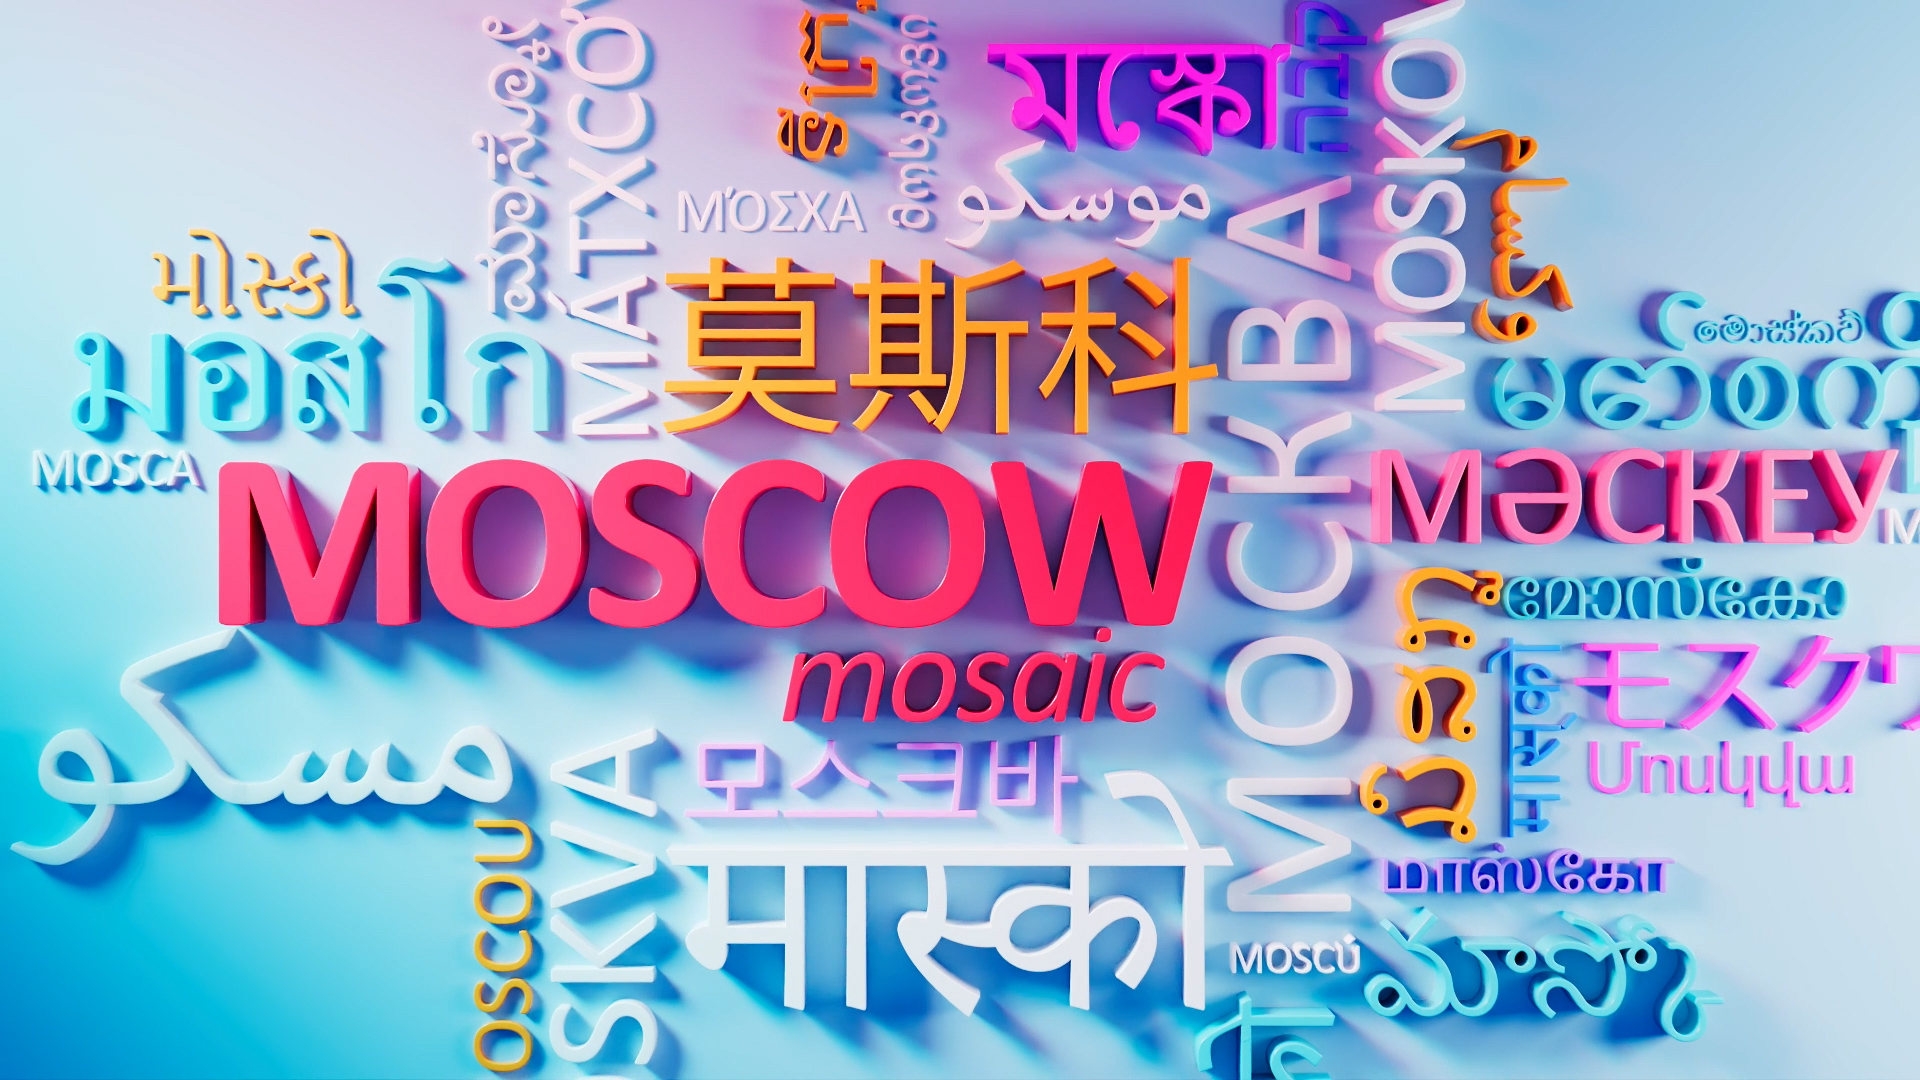 Watch the new season of ‘Moscow Mosaic’ aired on the Big Asia TV channel and on the site bigasia.ru.